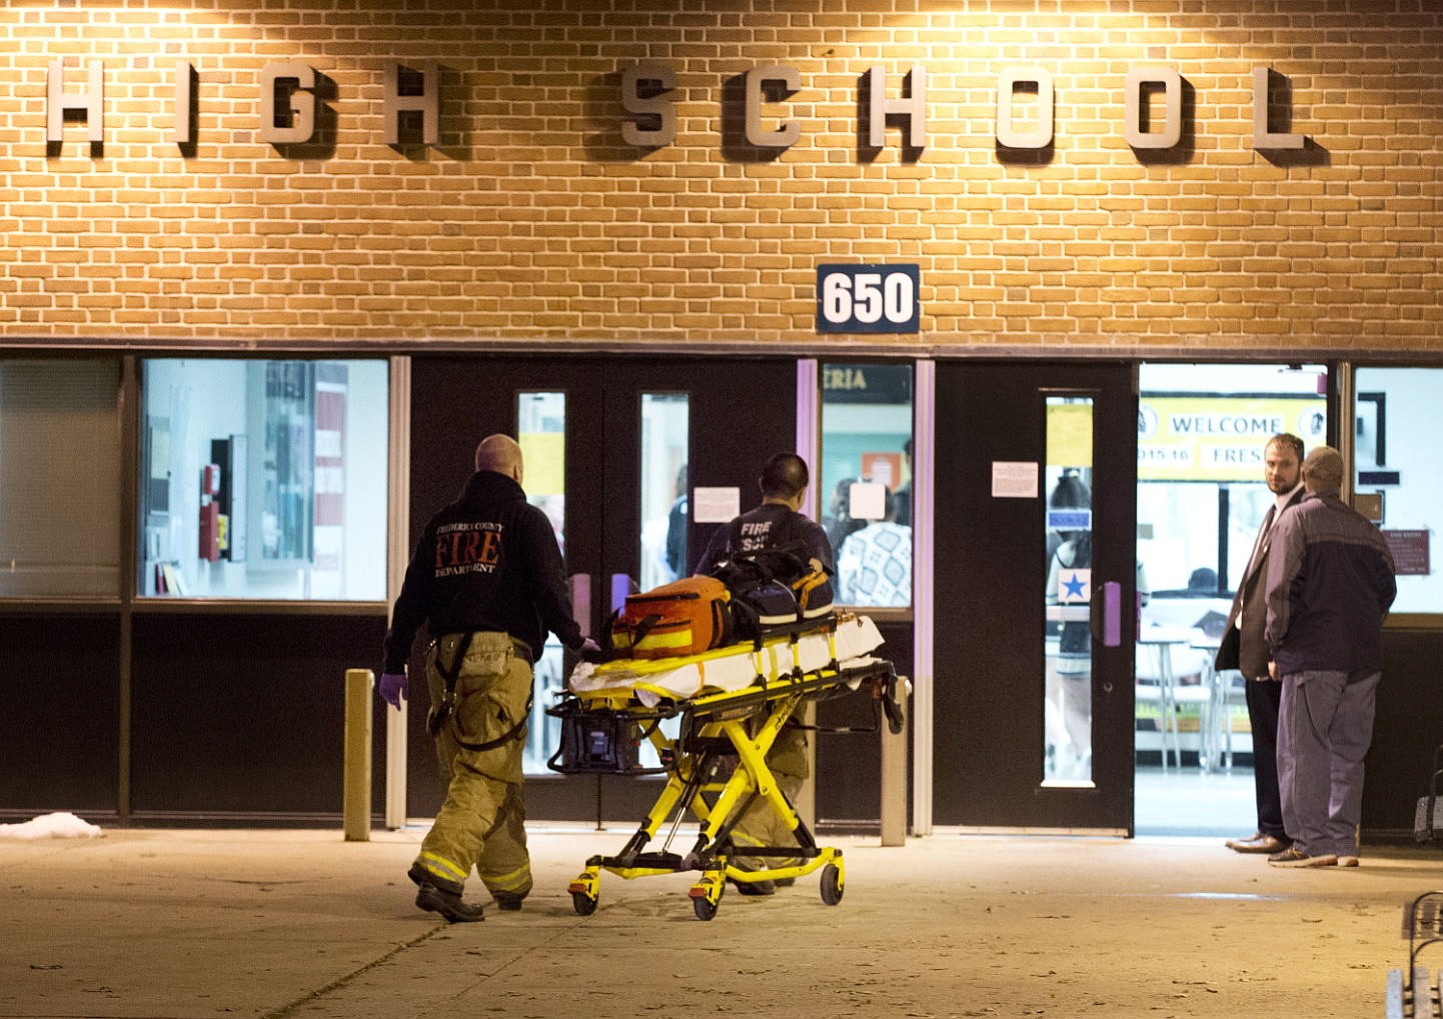 Bill Green/The Frederick News-Post
Officials enter Frederick High School on Wednesday in Frederick, Md. Police and school officials said students were shot outside the school while a basketball game was being played inside.